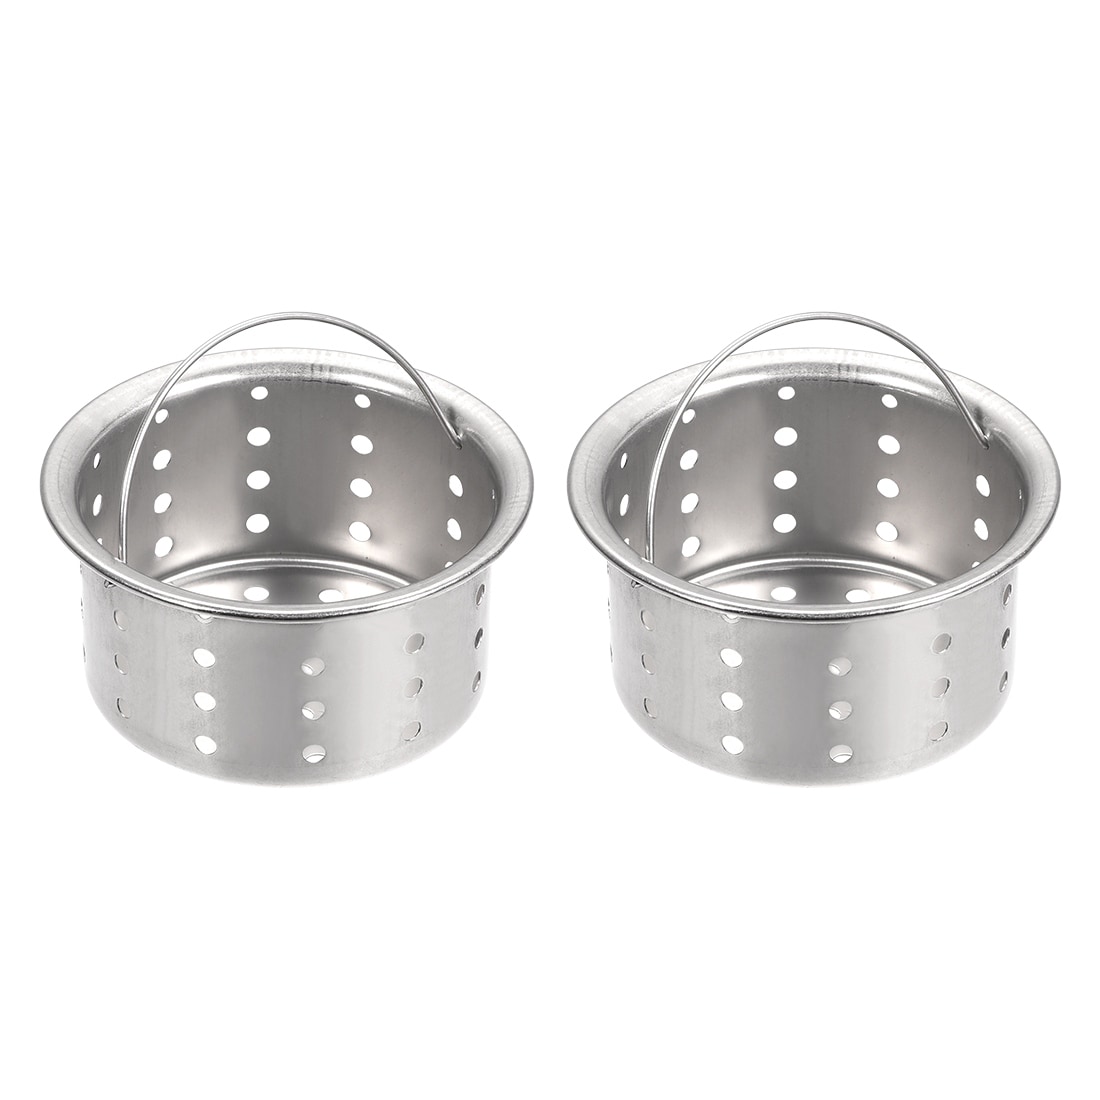 https://ak1.ostkcdn.com/images/products/is/images/direct/b7a9639b9bc2ec60201097baaa7f7c9882755bbc/Basin-Sink-Strainer-Basket-with-Handle-Stainless-Steel-79mm-Diameter-2Pcs.jpg